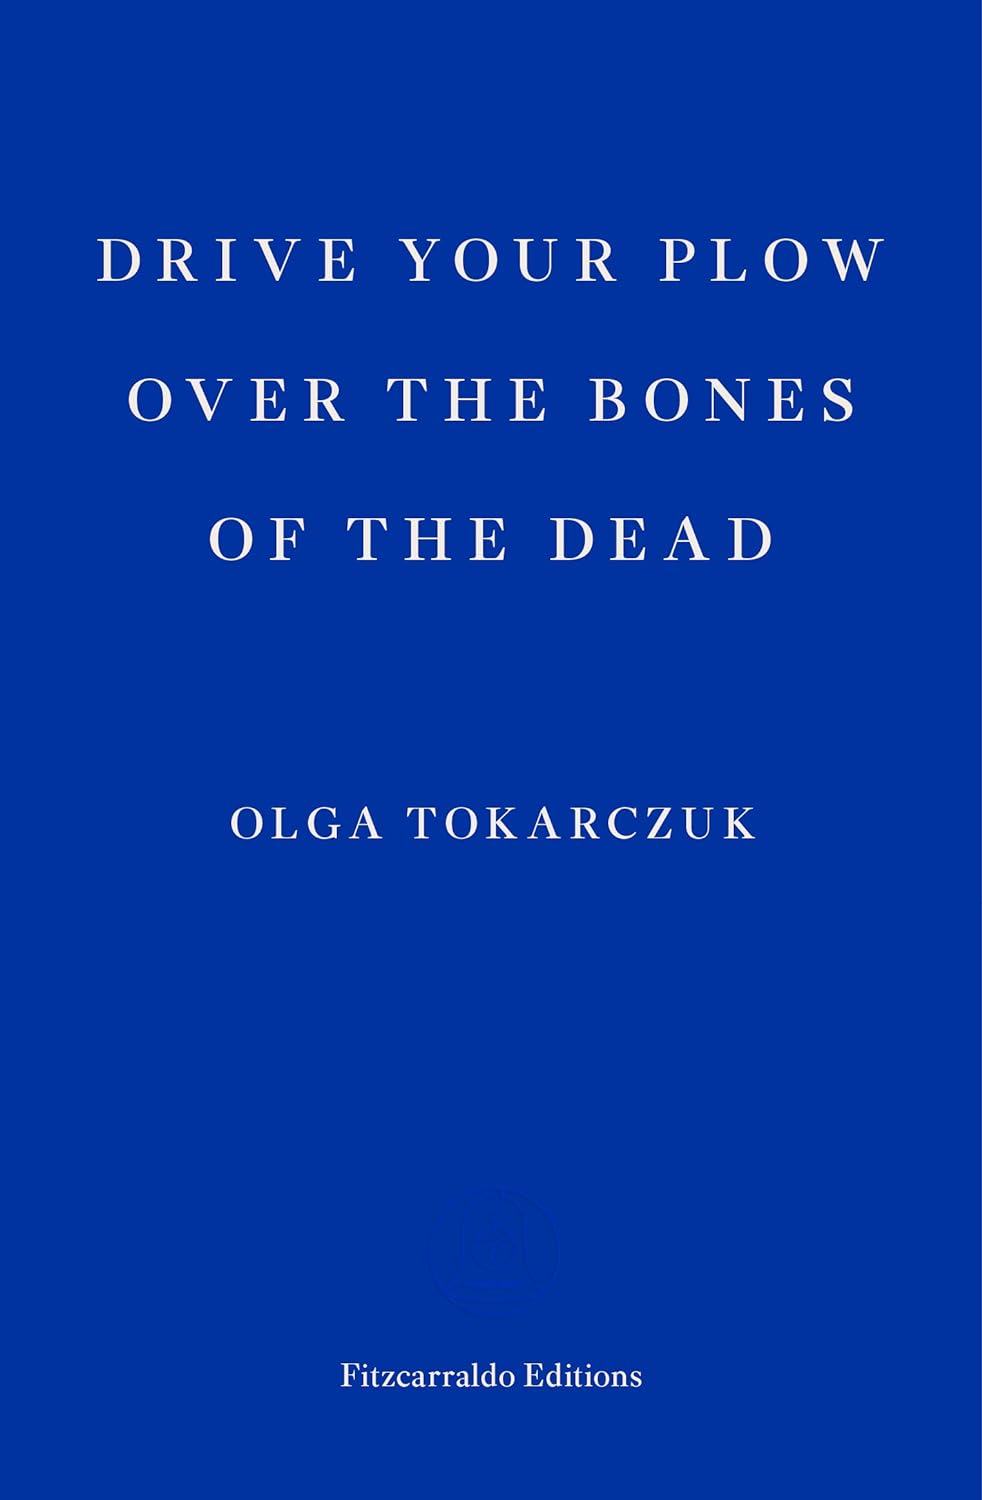 Drive Your Plow Over the Bones of the Dead By Olga Tokarczuk